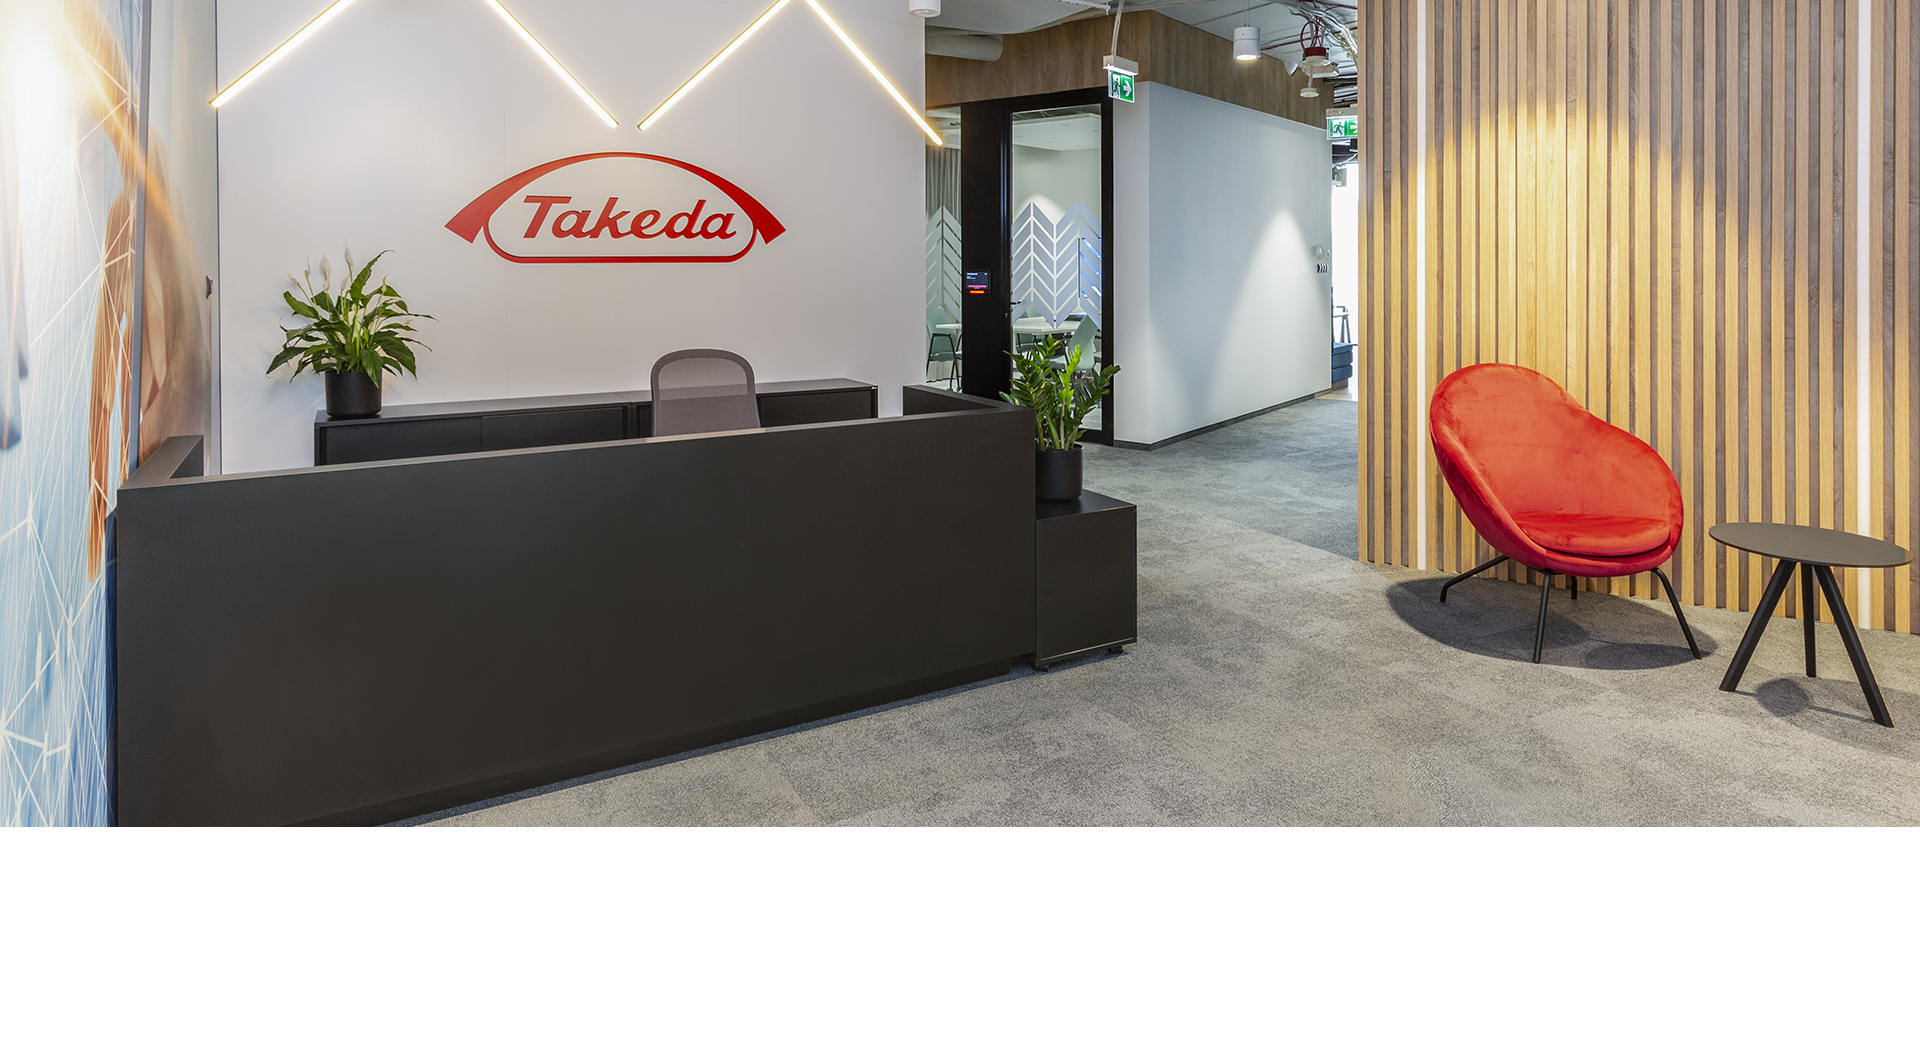 <b> DISCOVER TAKEDA BUSINESS SOLUTIONS OFFICE IN ŁÓDŹ </b>